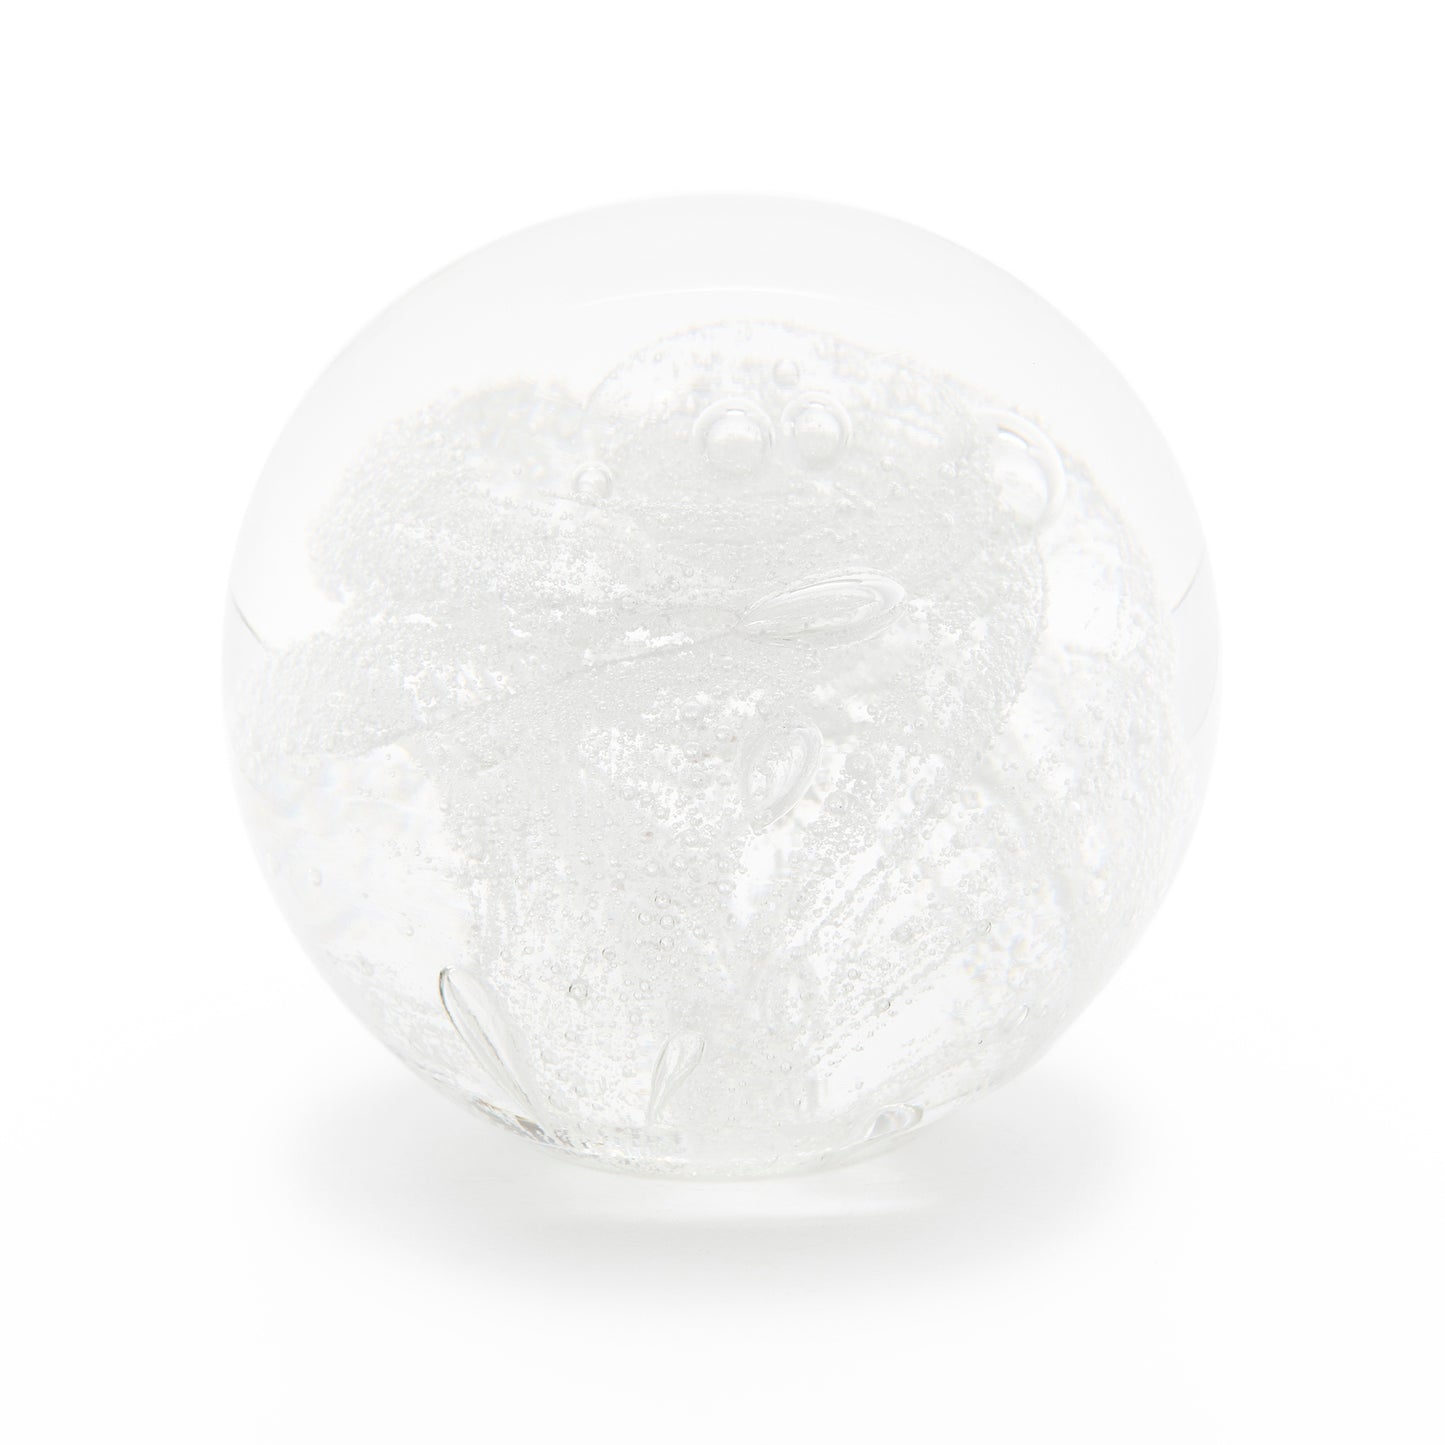 Load image into Gallery viewer, Round memorial glass art paperweight with cremation ash. Clear glass.
